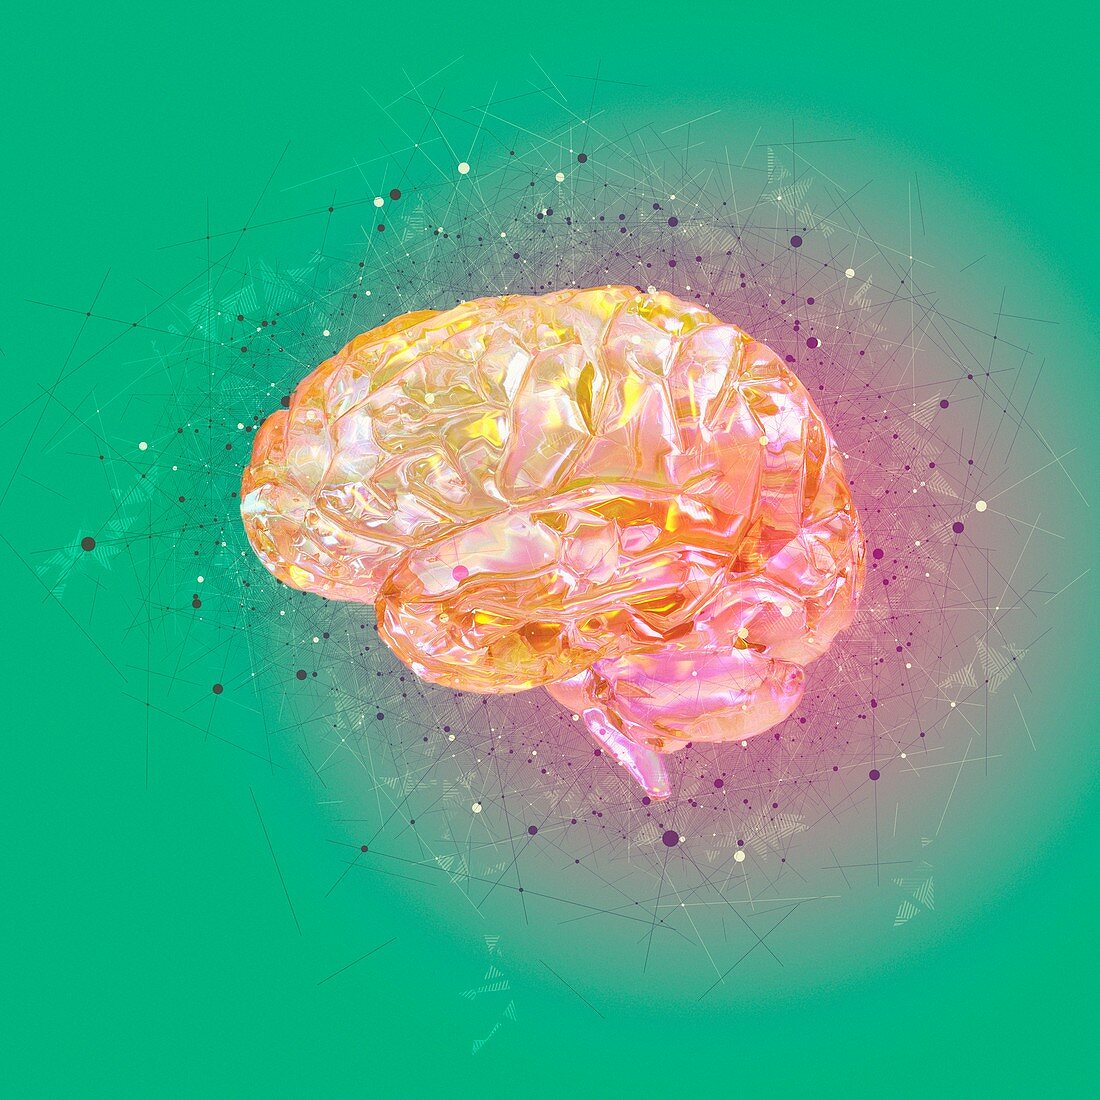 Atomic structure of the human brain, illustration